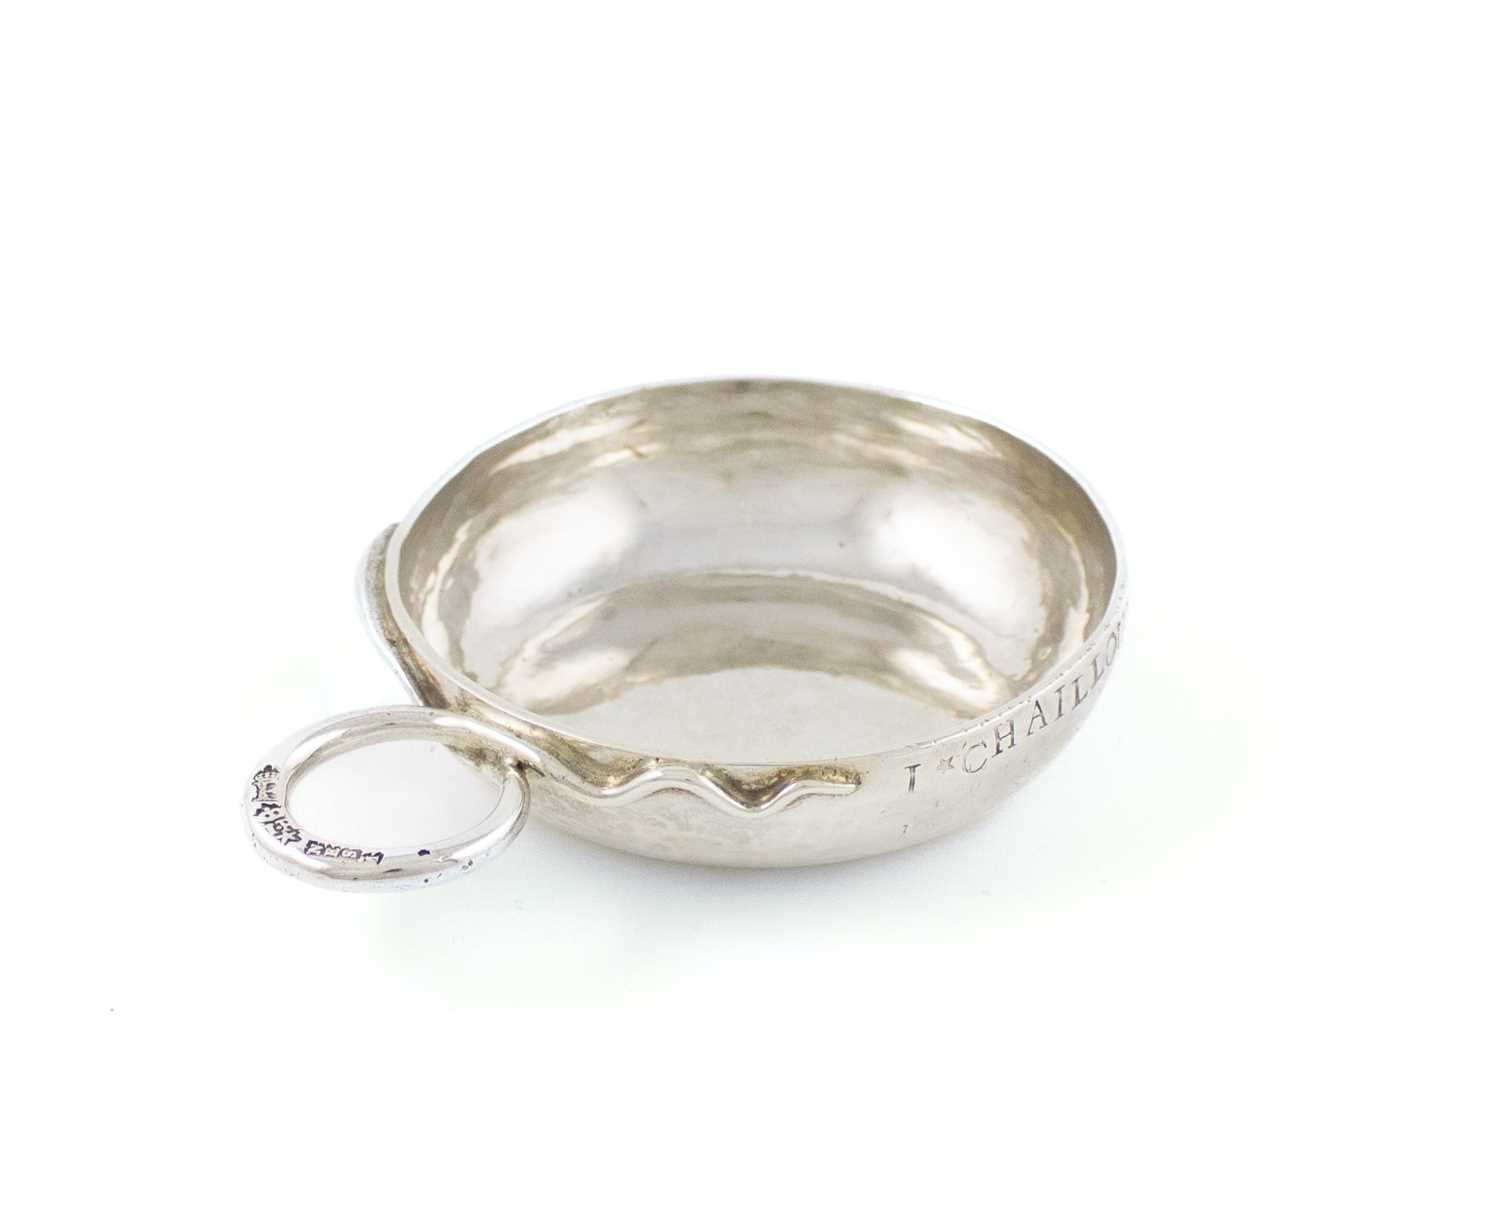 An 18th century French silver wine taster, by Jean Roffay, Angers 1779, circular form, snake ring